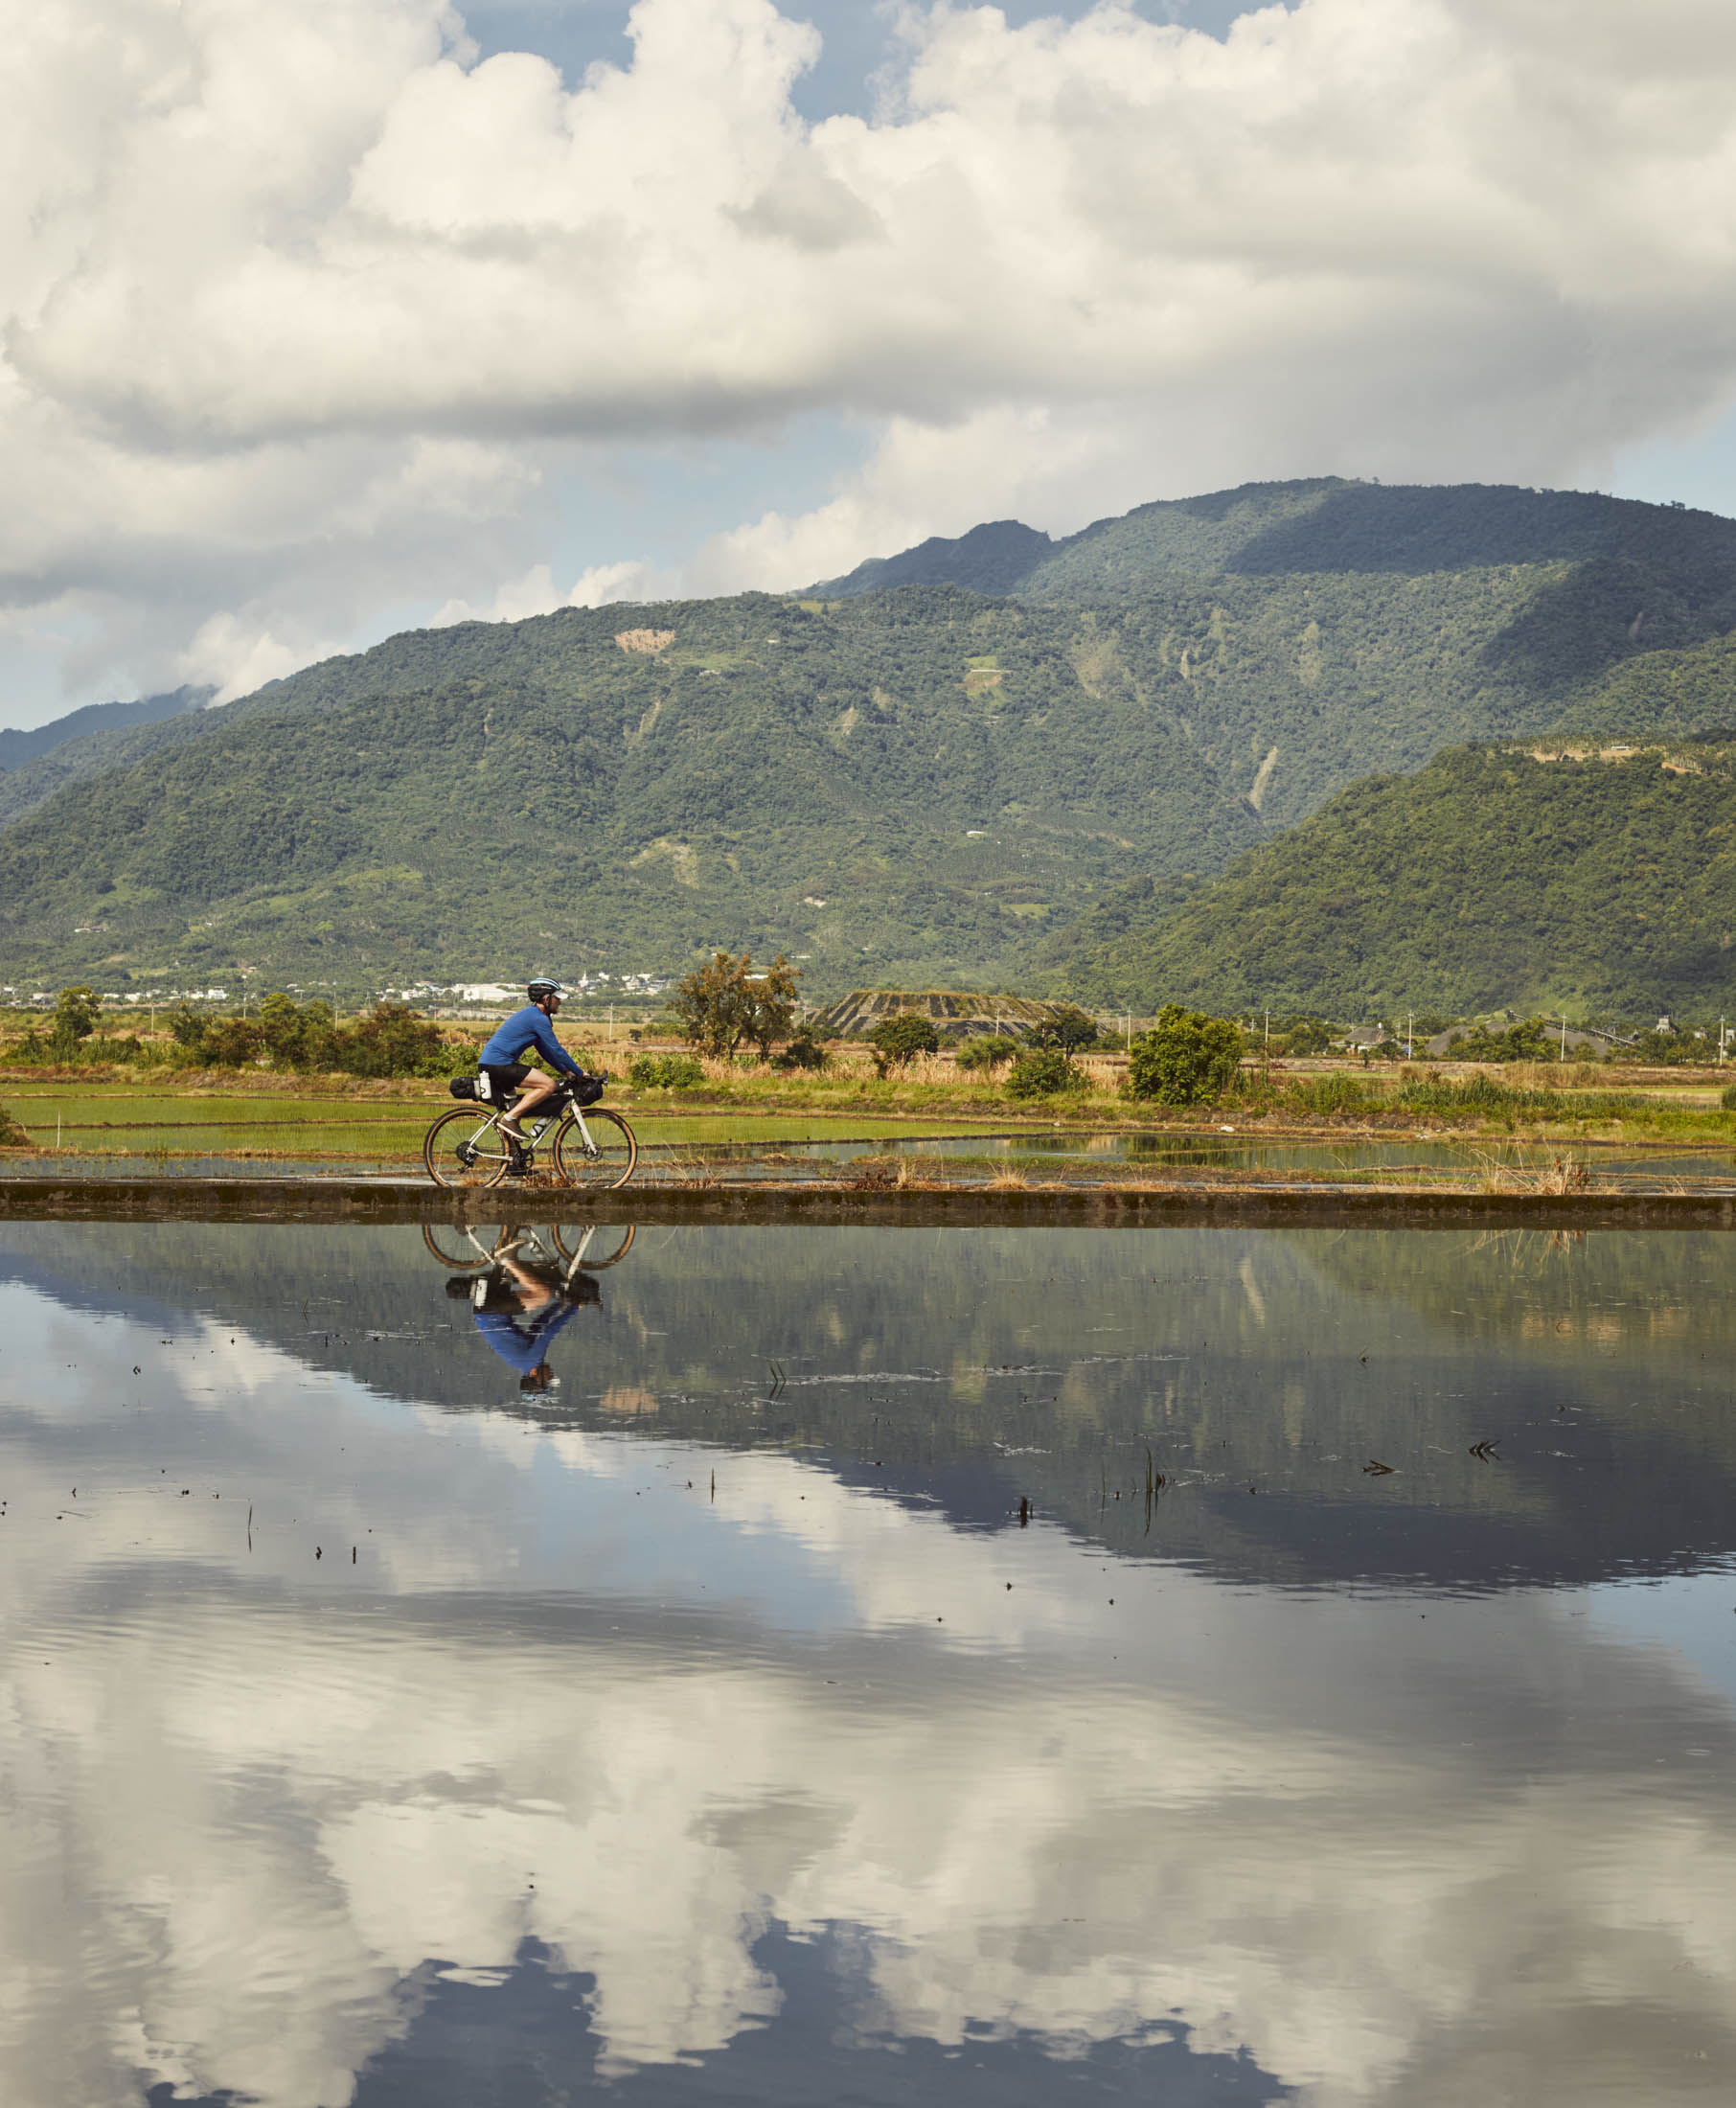 Cycling Route 1 through the flooded rice fields of Hualien.